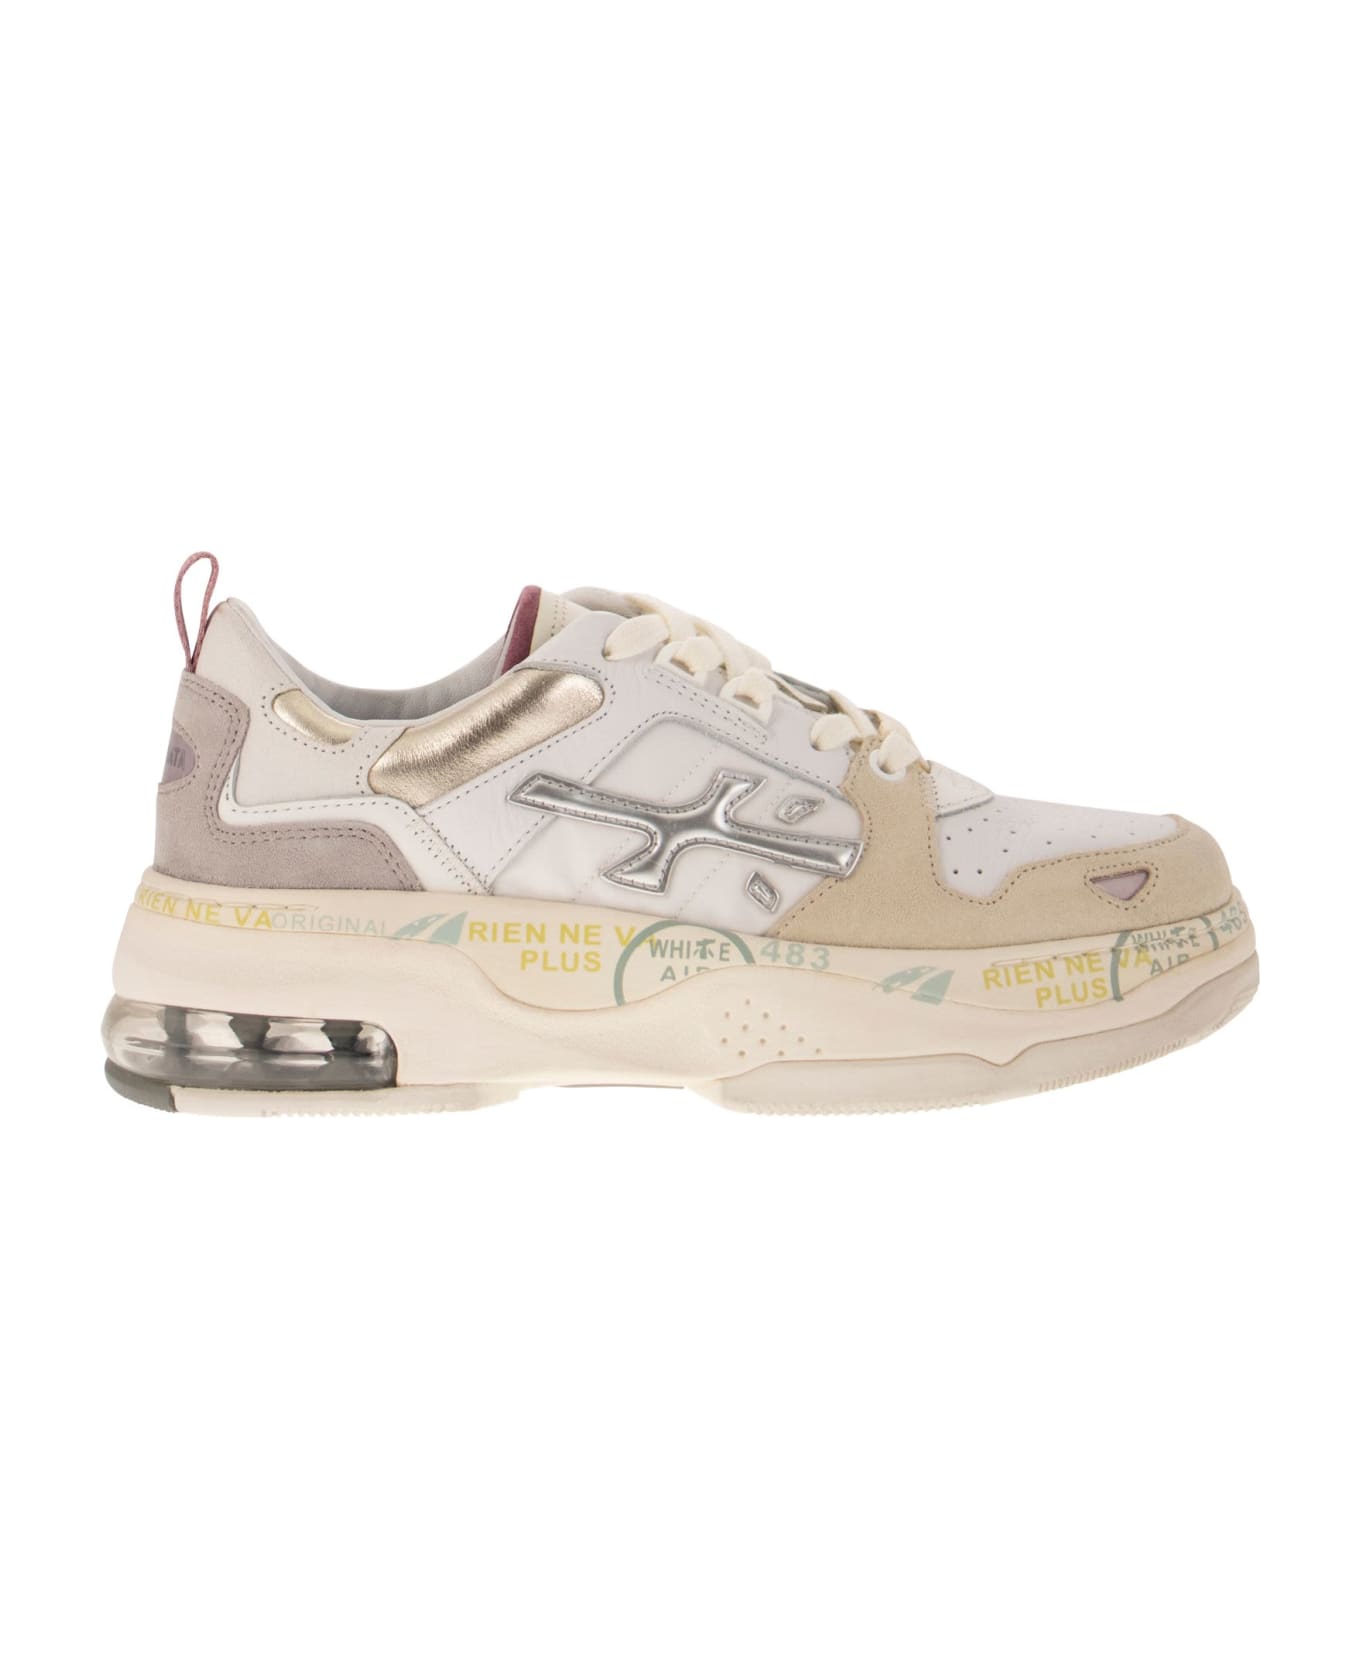 Premiata 'draked' Multicolor Leather Blend Sneakers - White/ivory